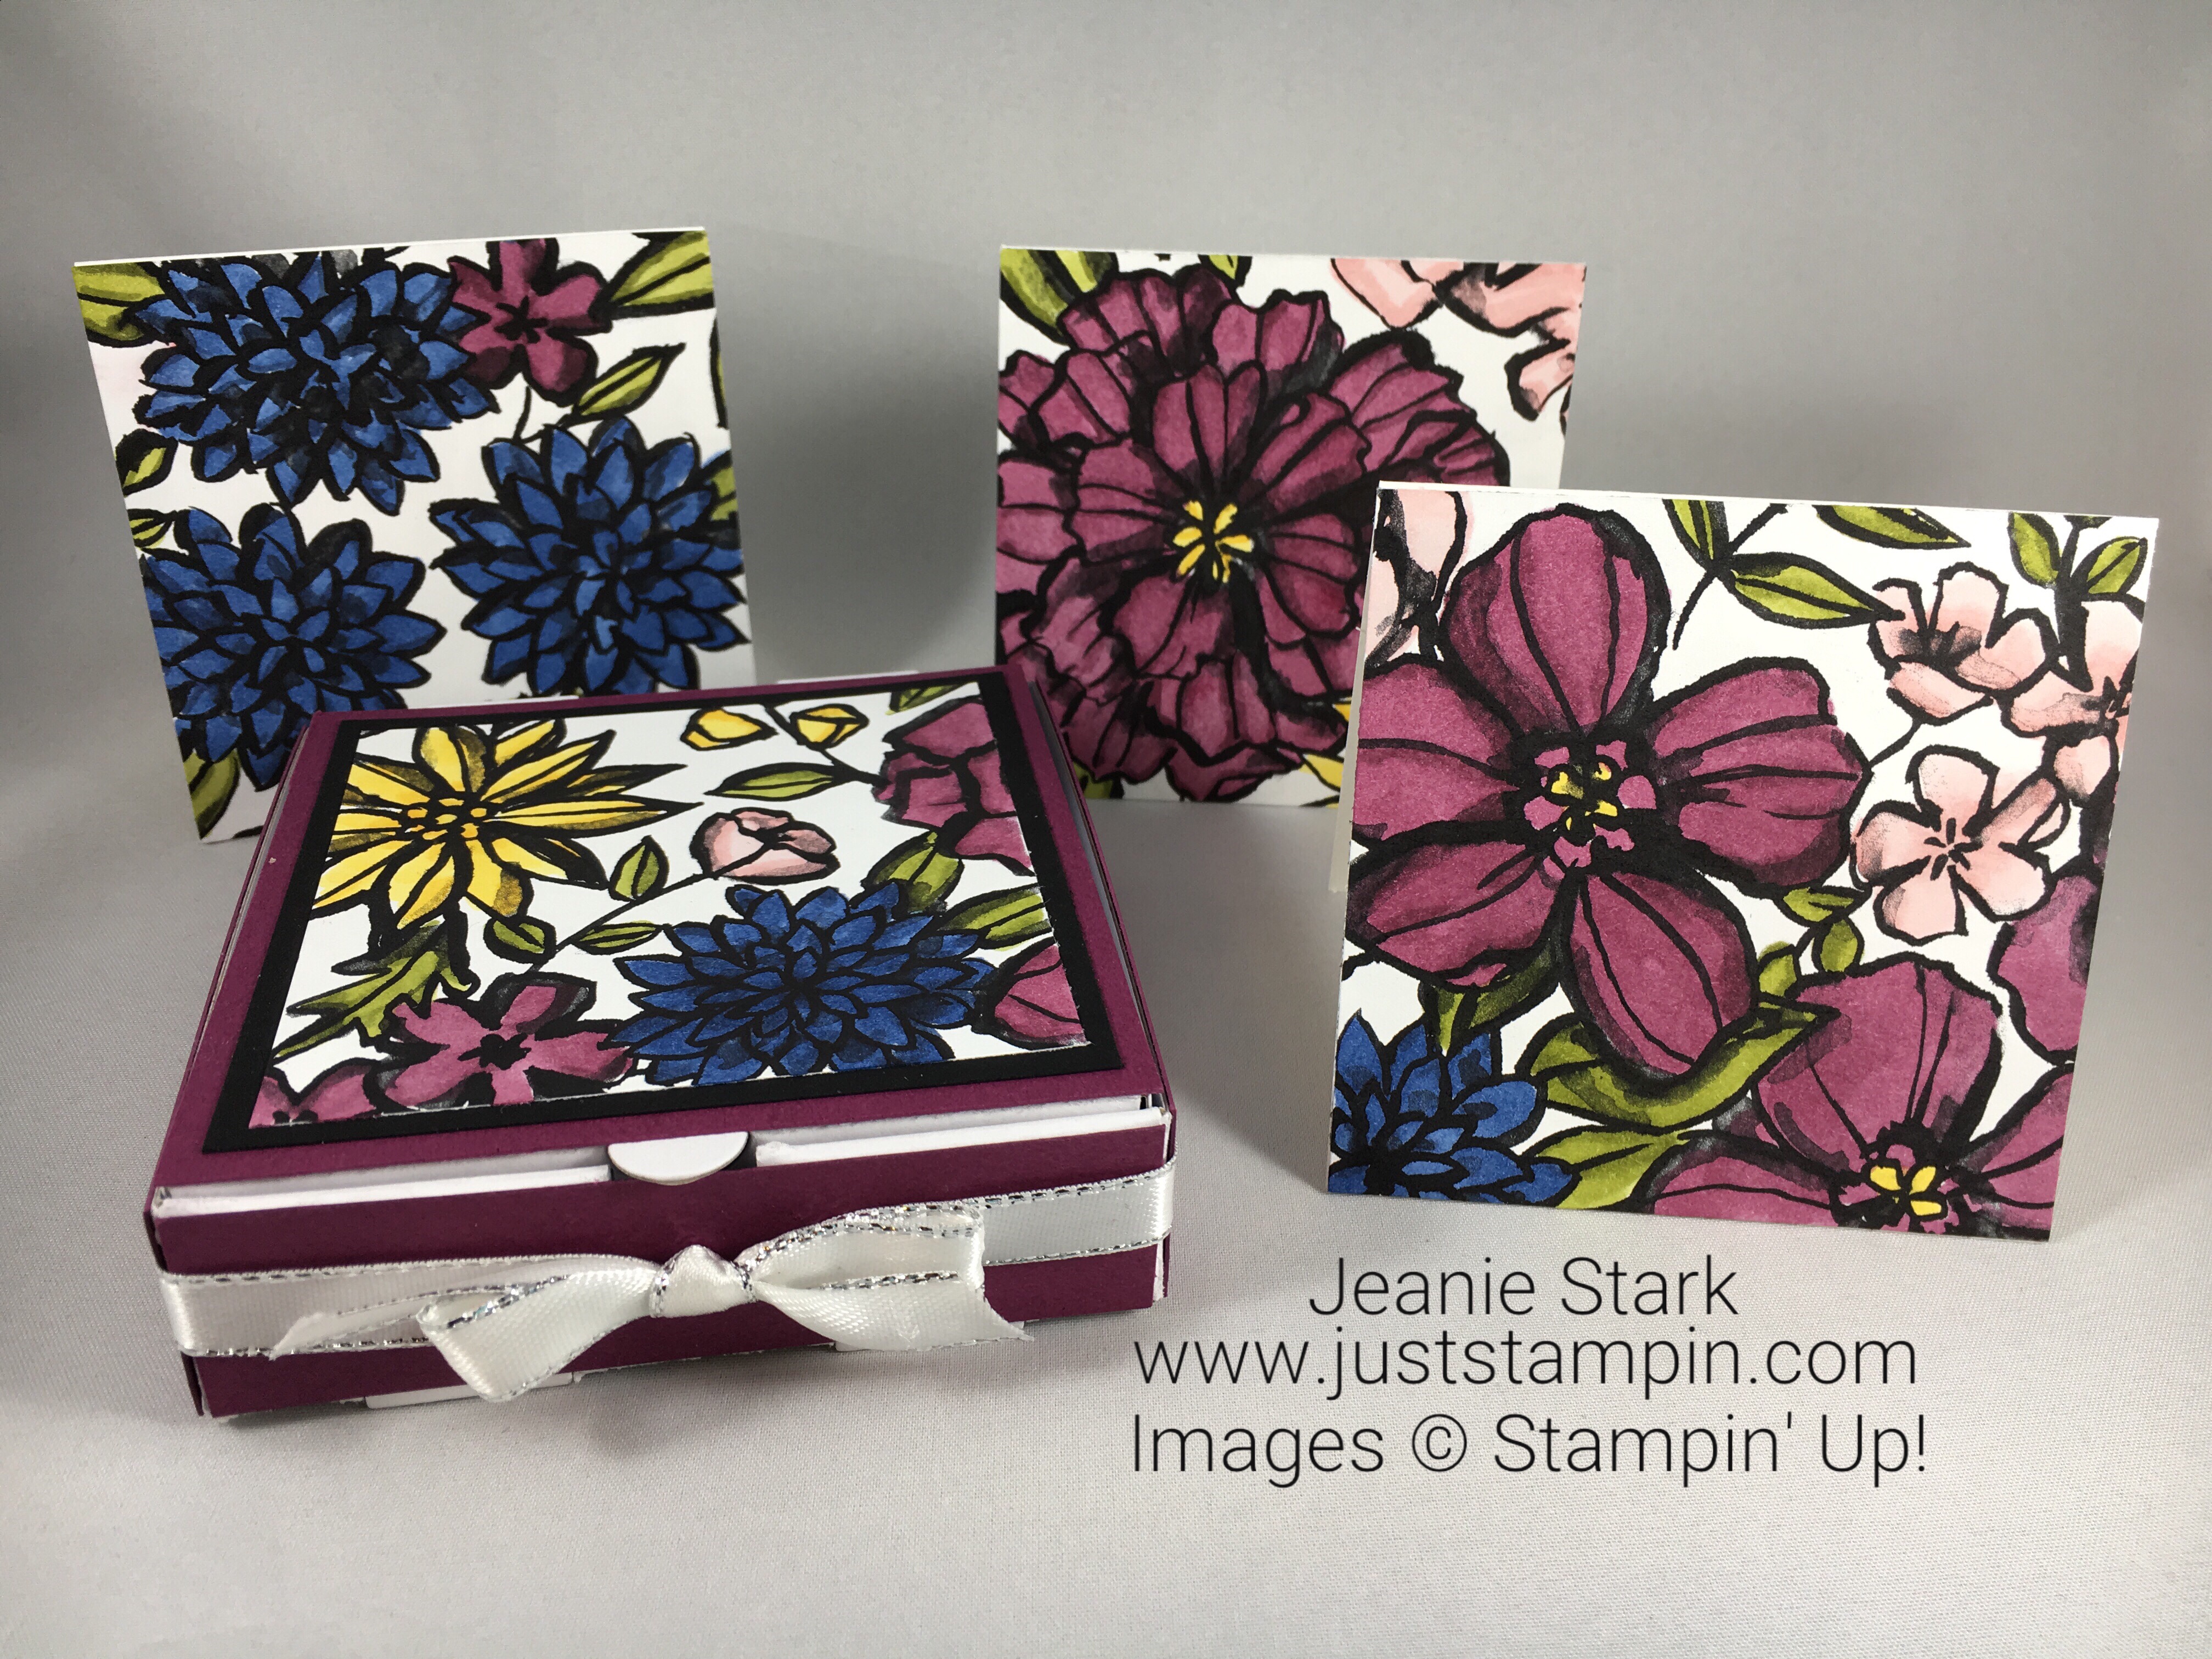 Stampin Up Petal Passion 3 x 3 card gift set - Jeanie Stark StampinUp